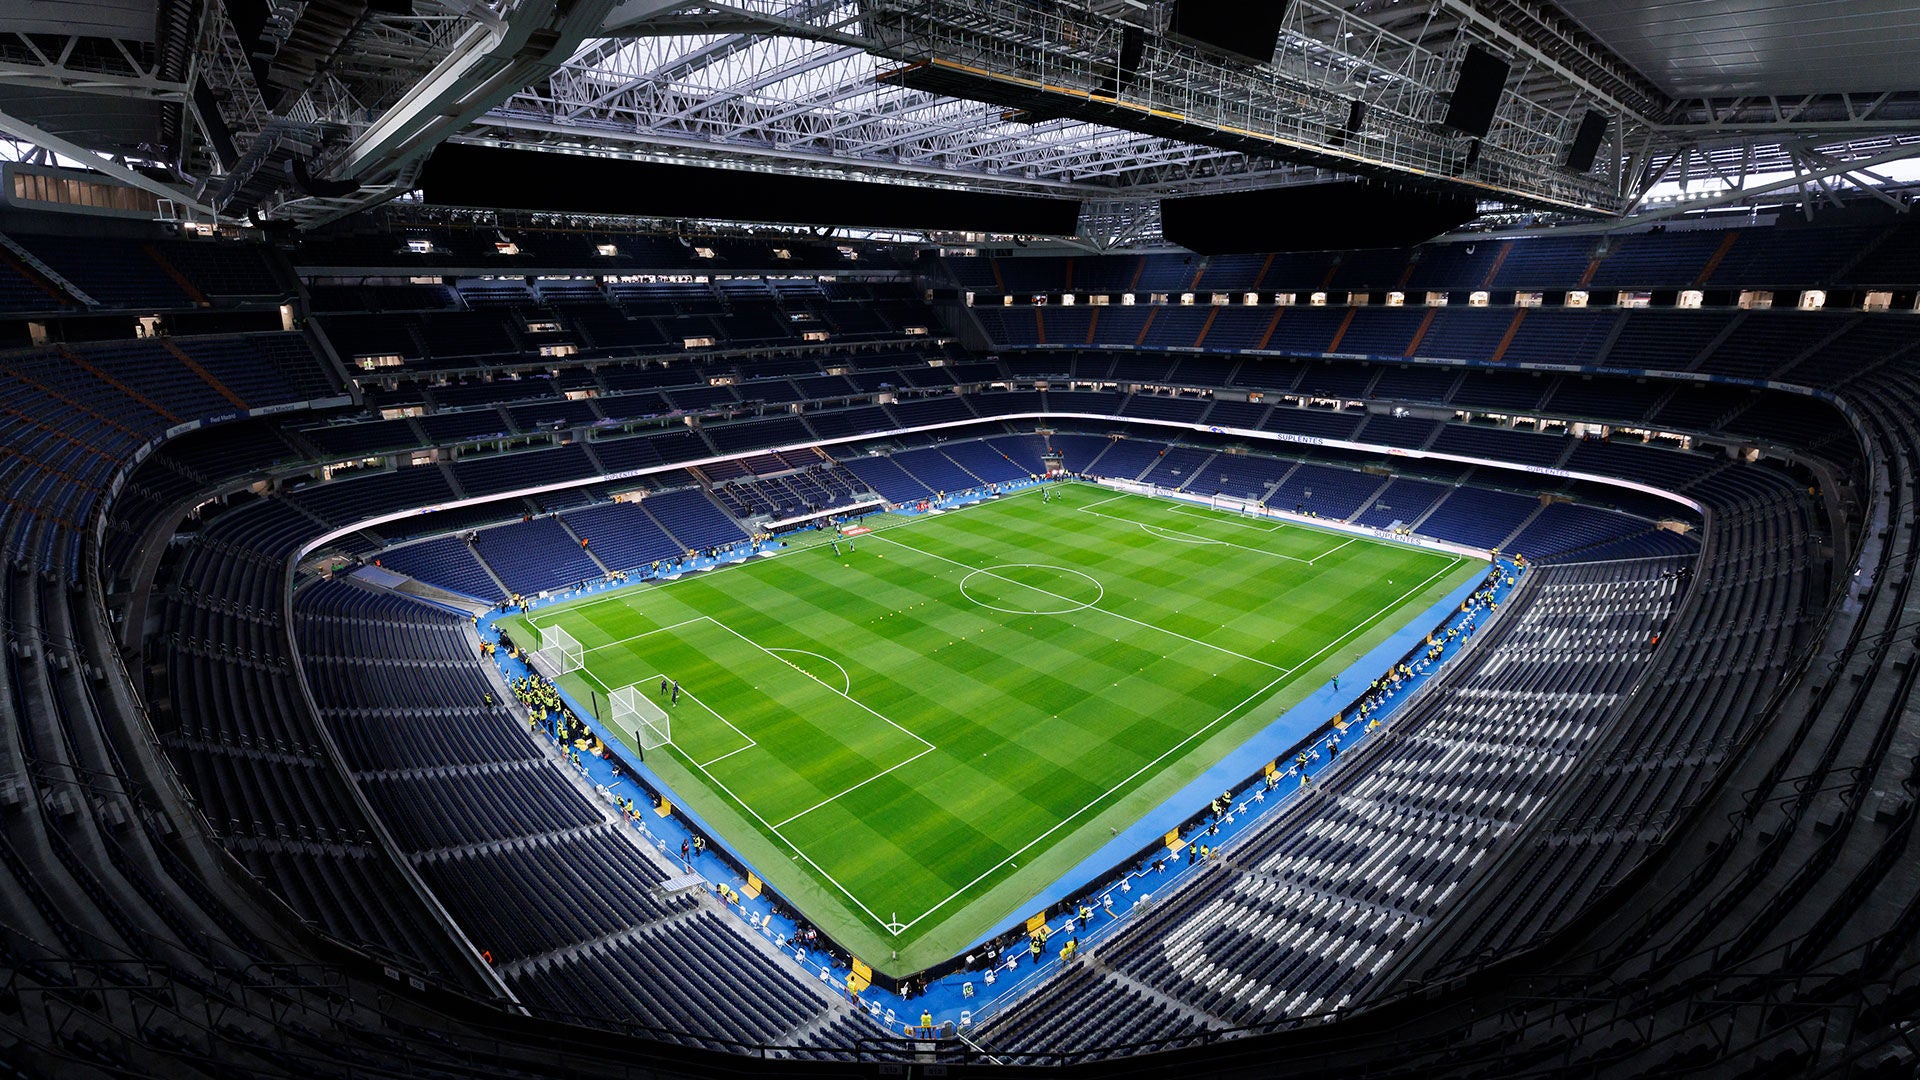 Real Madrid is the world's highest earning football club, according to Deloitte